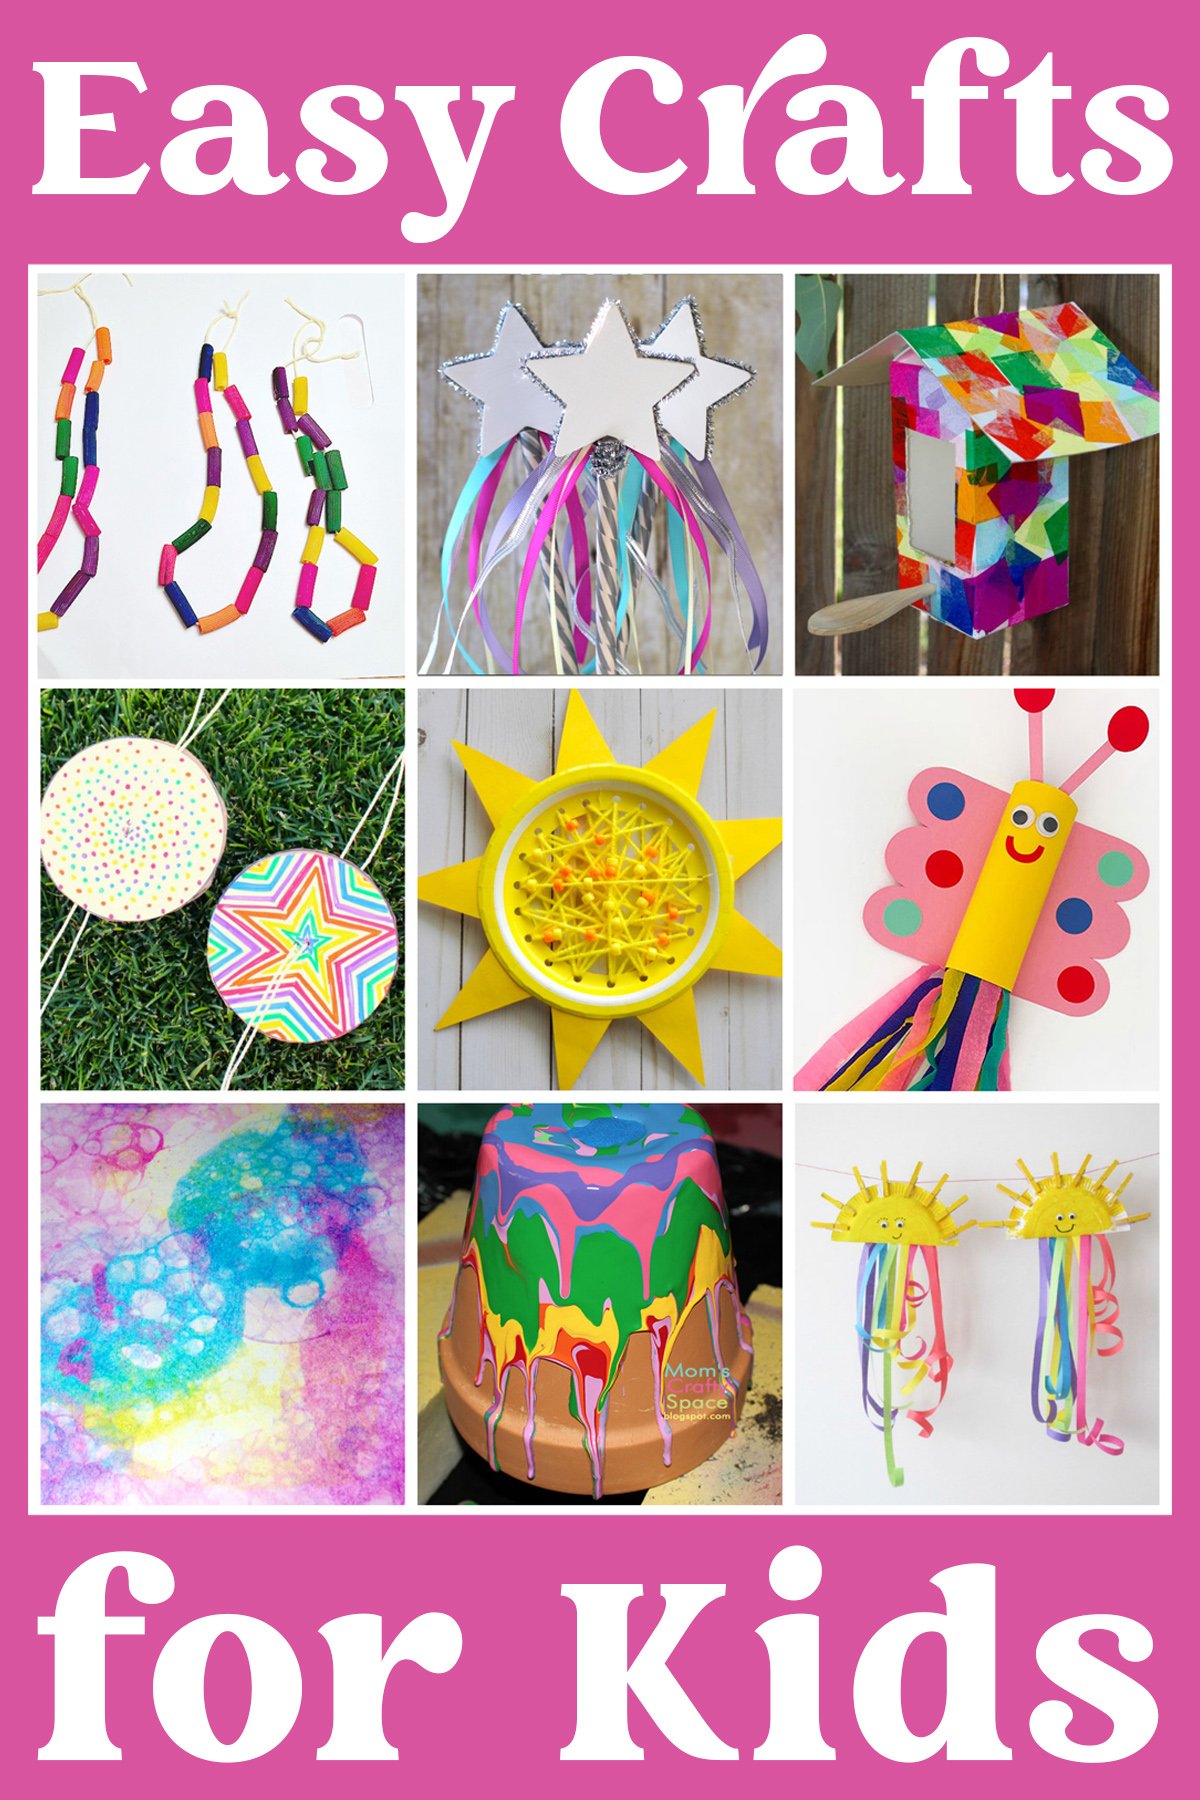 50+ Quick & Easy Crafts for Kids